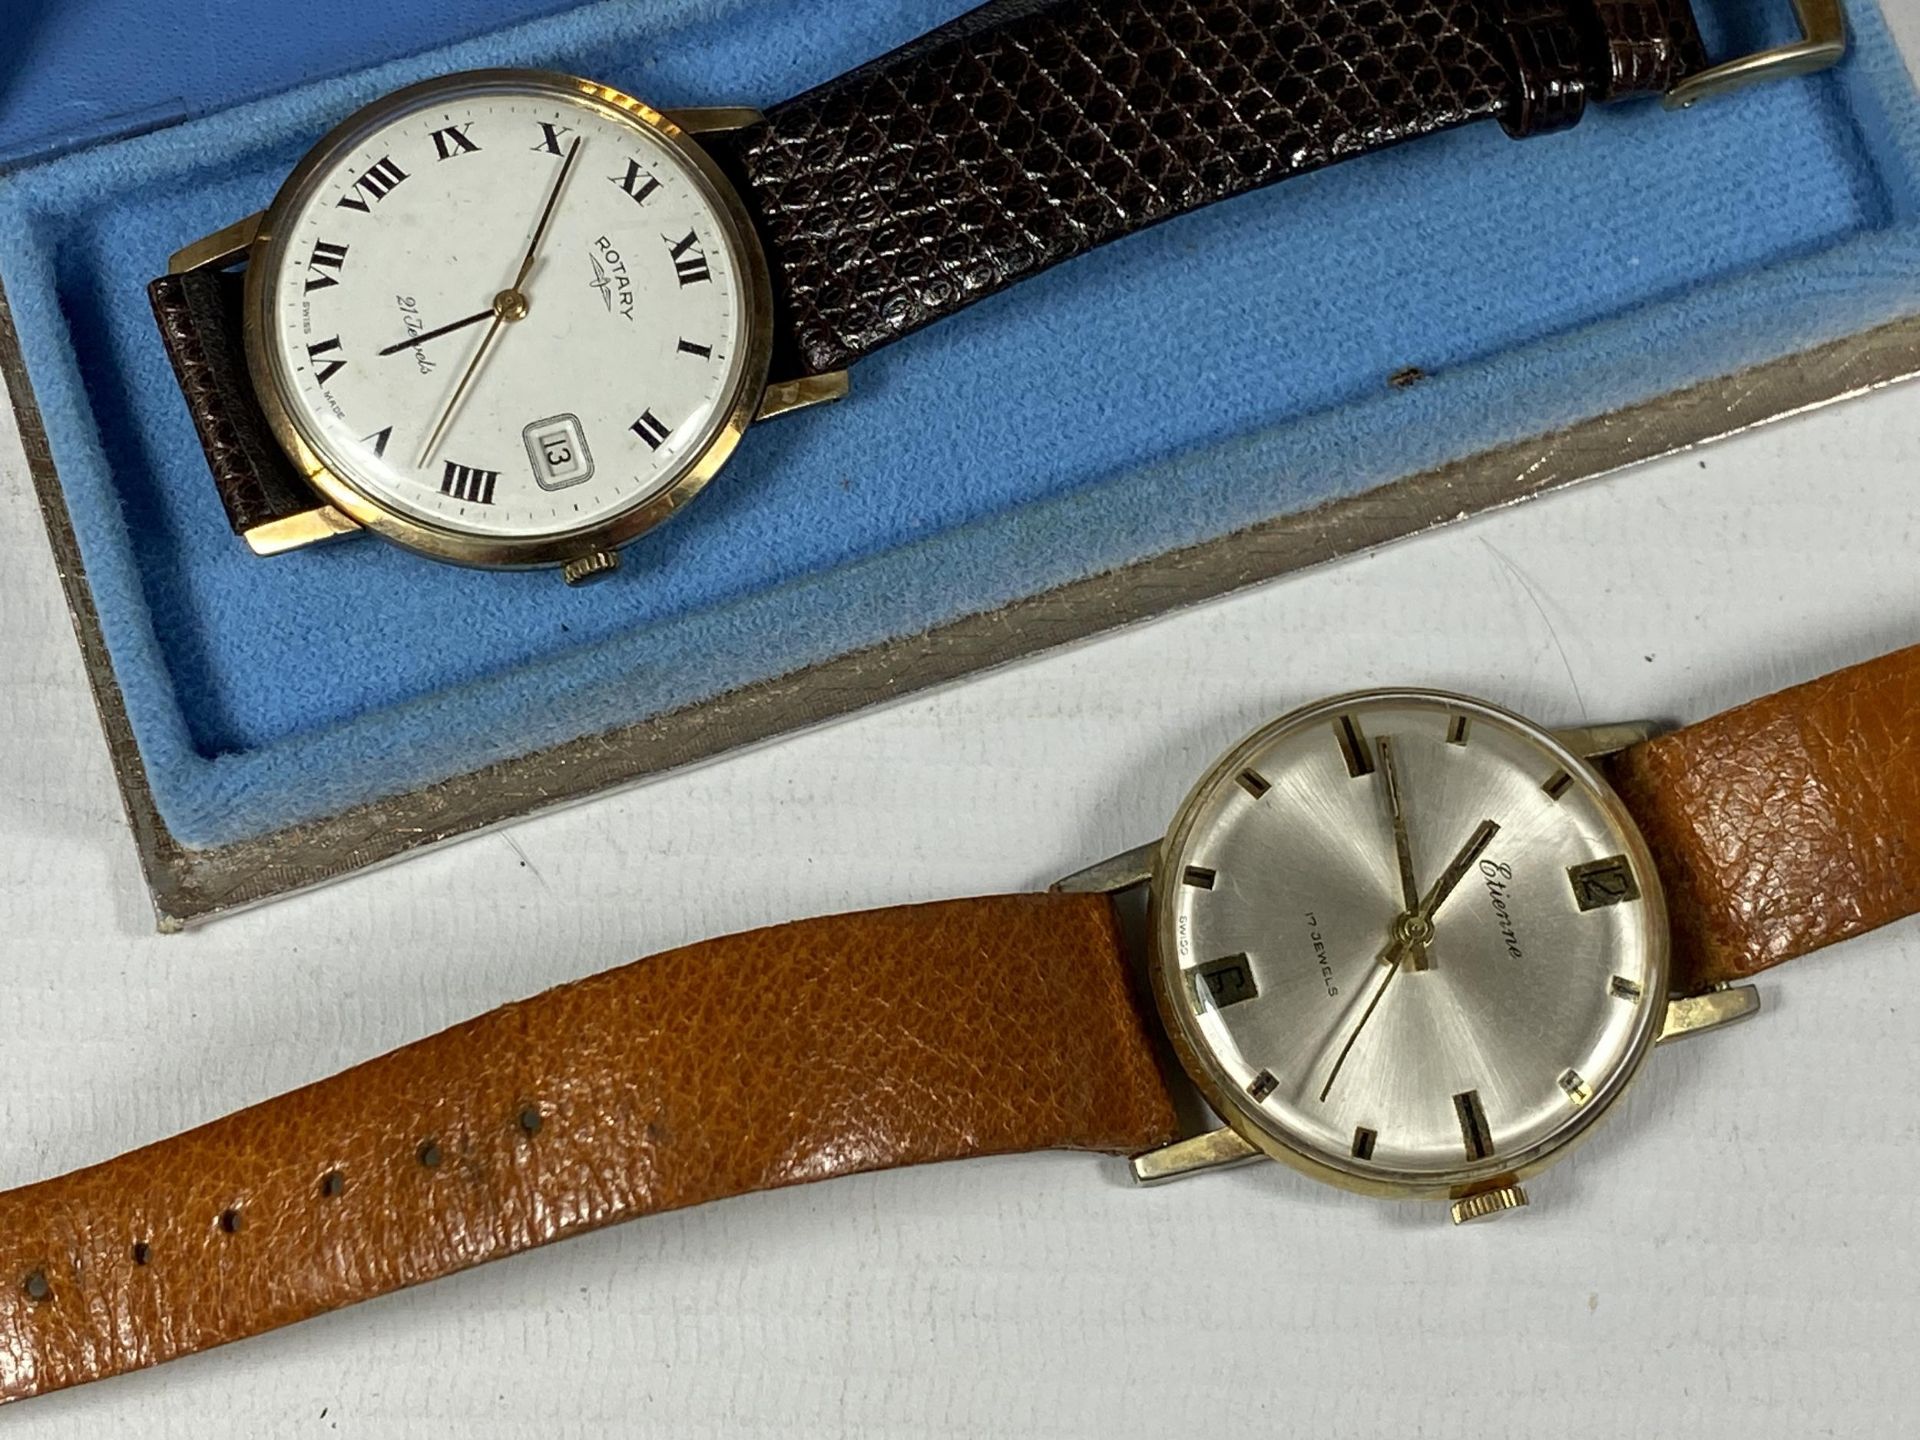 A GROUP OF THREE WATCHES - VINTAGE BOXED ROTARY, ETIENNE DATE WATCH AND RETRO SOLAR WATCH - Image 2 of 3